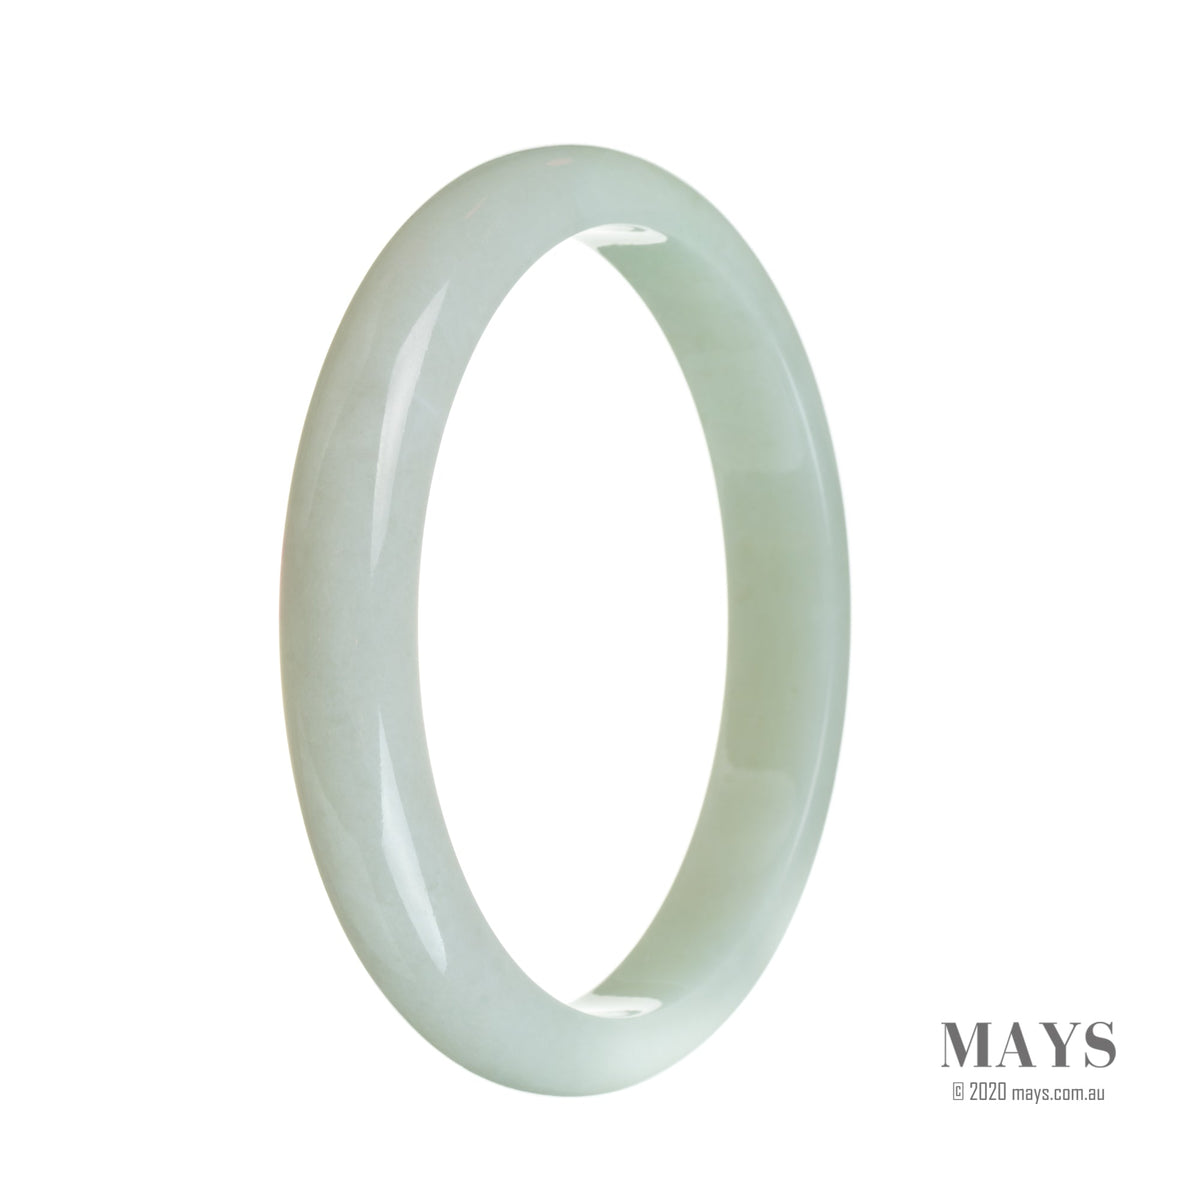 A pale green traditional jade bracelet with a semi-round shape, measuring 78mm in size.